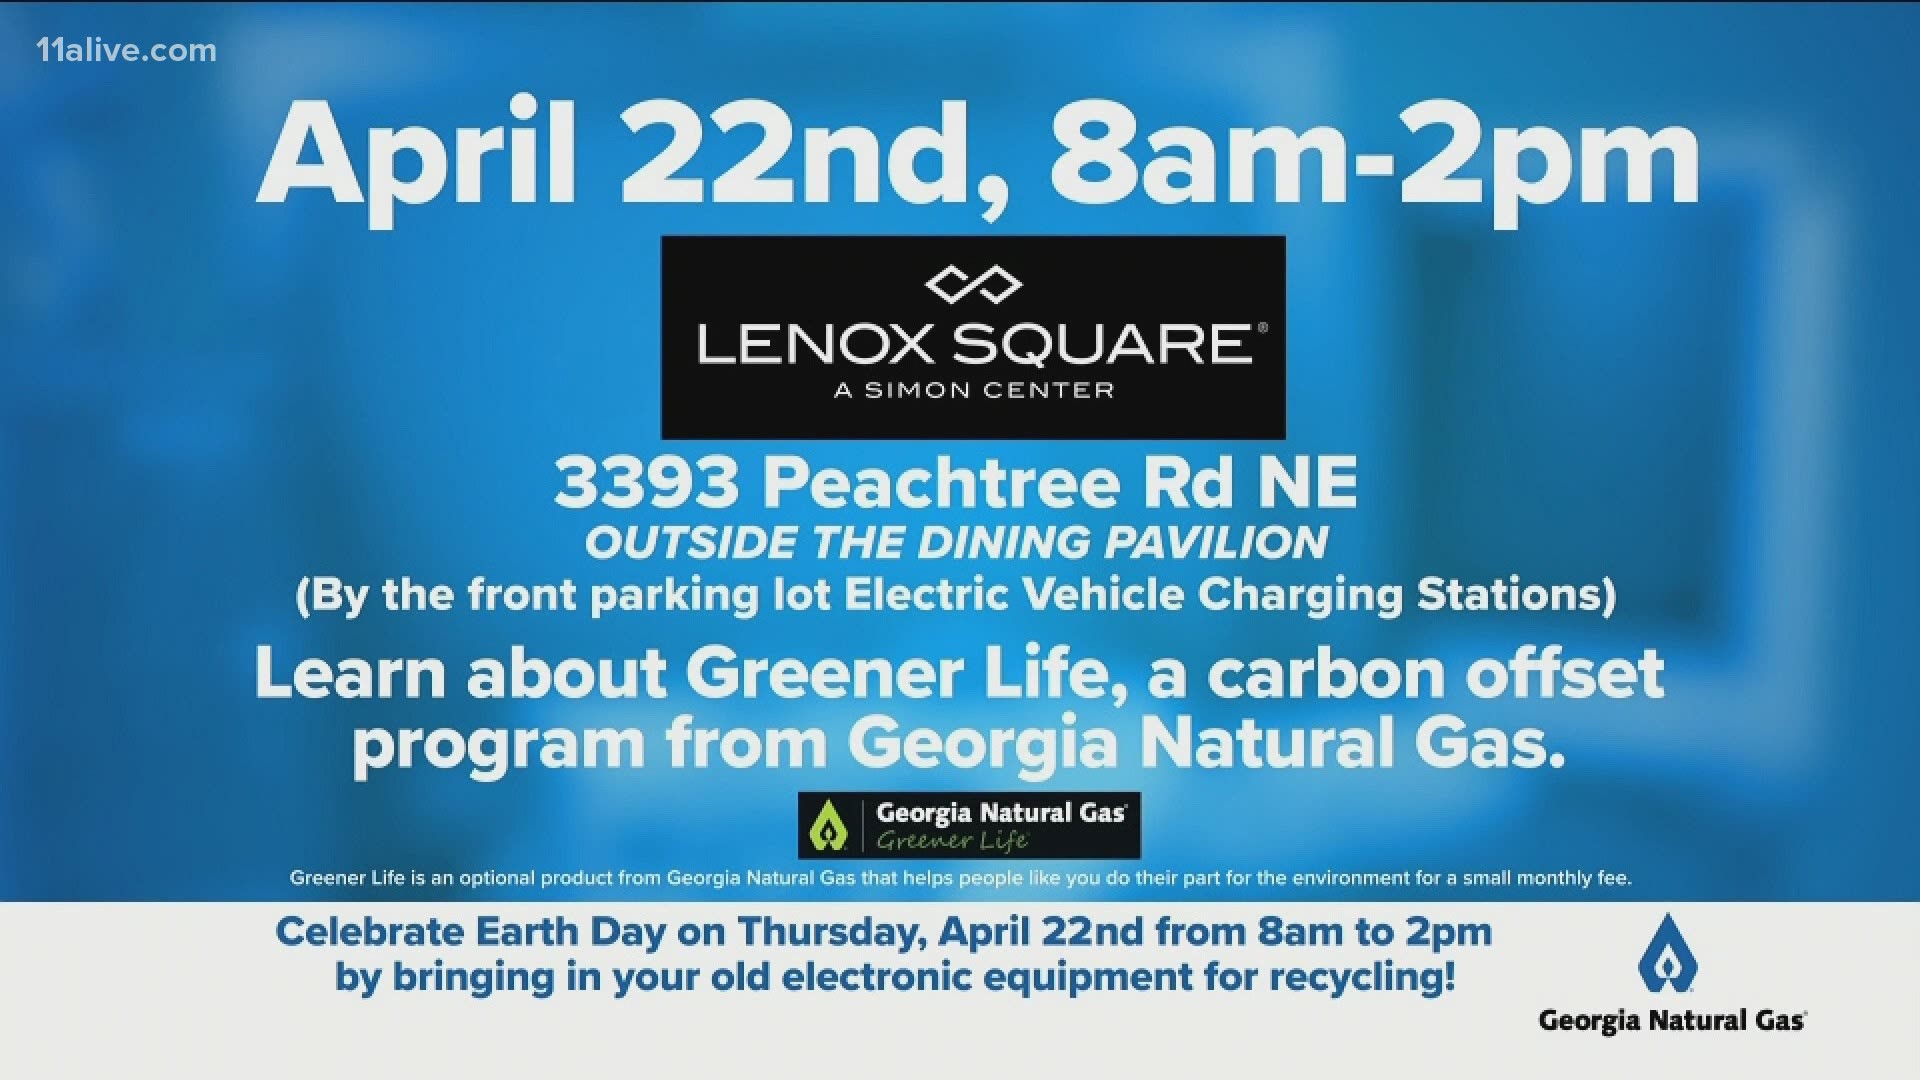 Give back this Earth Day! Recycle your old electronics at Lenox Square Thursday, April 22nd.